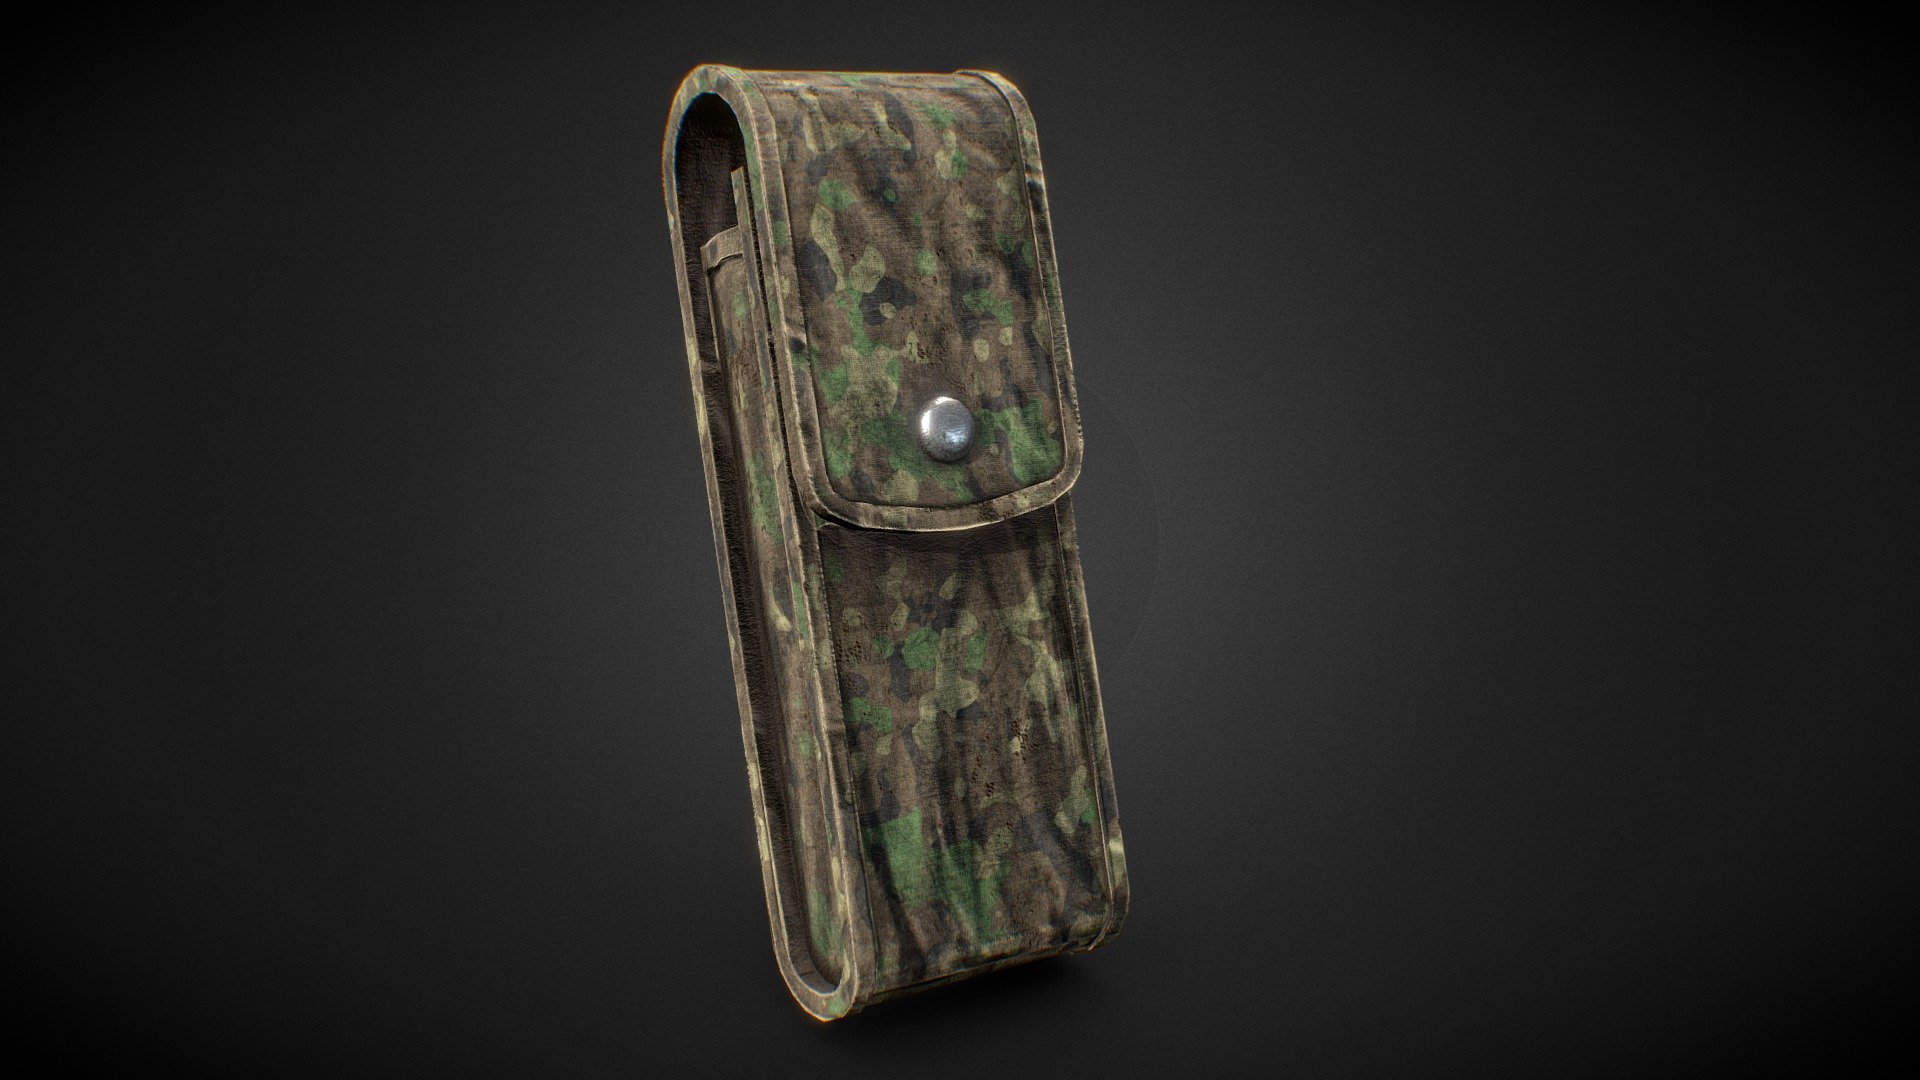 First time sculpting fabric :) Made in blender, textured in Substance Painter based from a picture of some pouches from the Vietnam War displaying the known woodland camouflage pattern 3d model